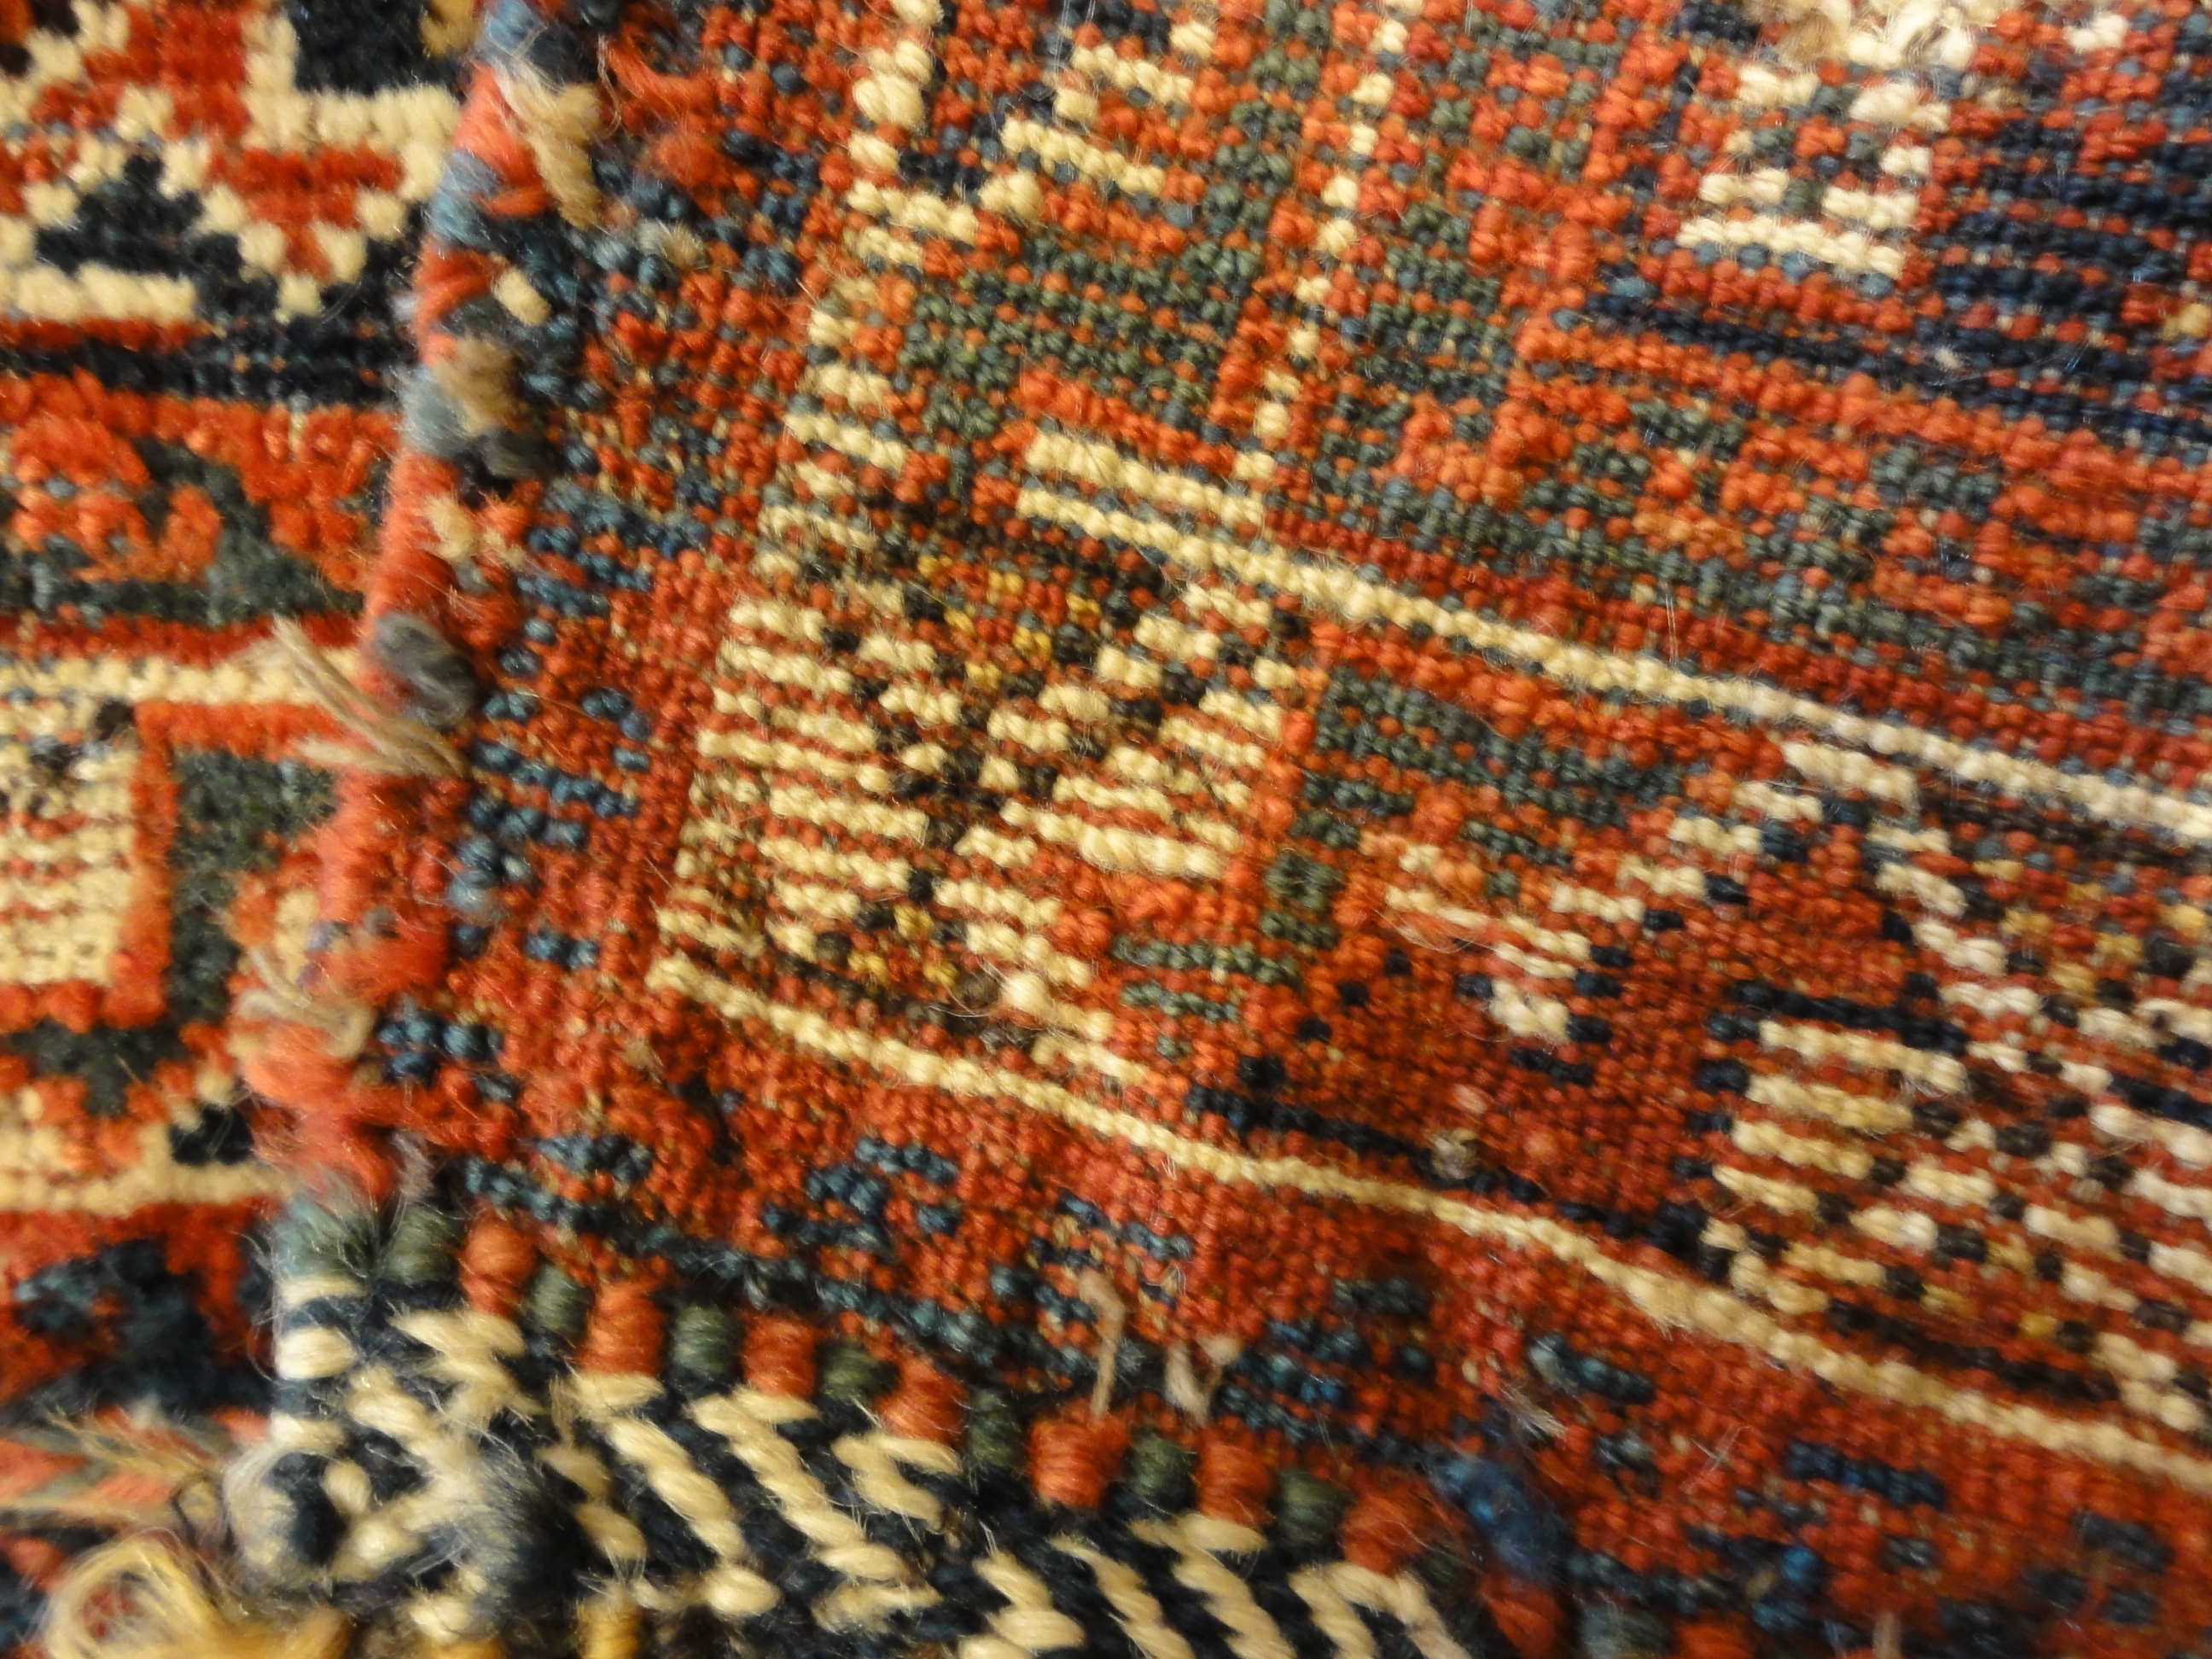 Antique Khamseh Bag Face. Rugs & More in the Santa Barbara Design Center. This is a made from fine craftsmanship and lustrous wool.